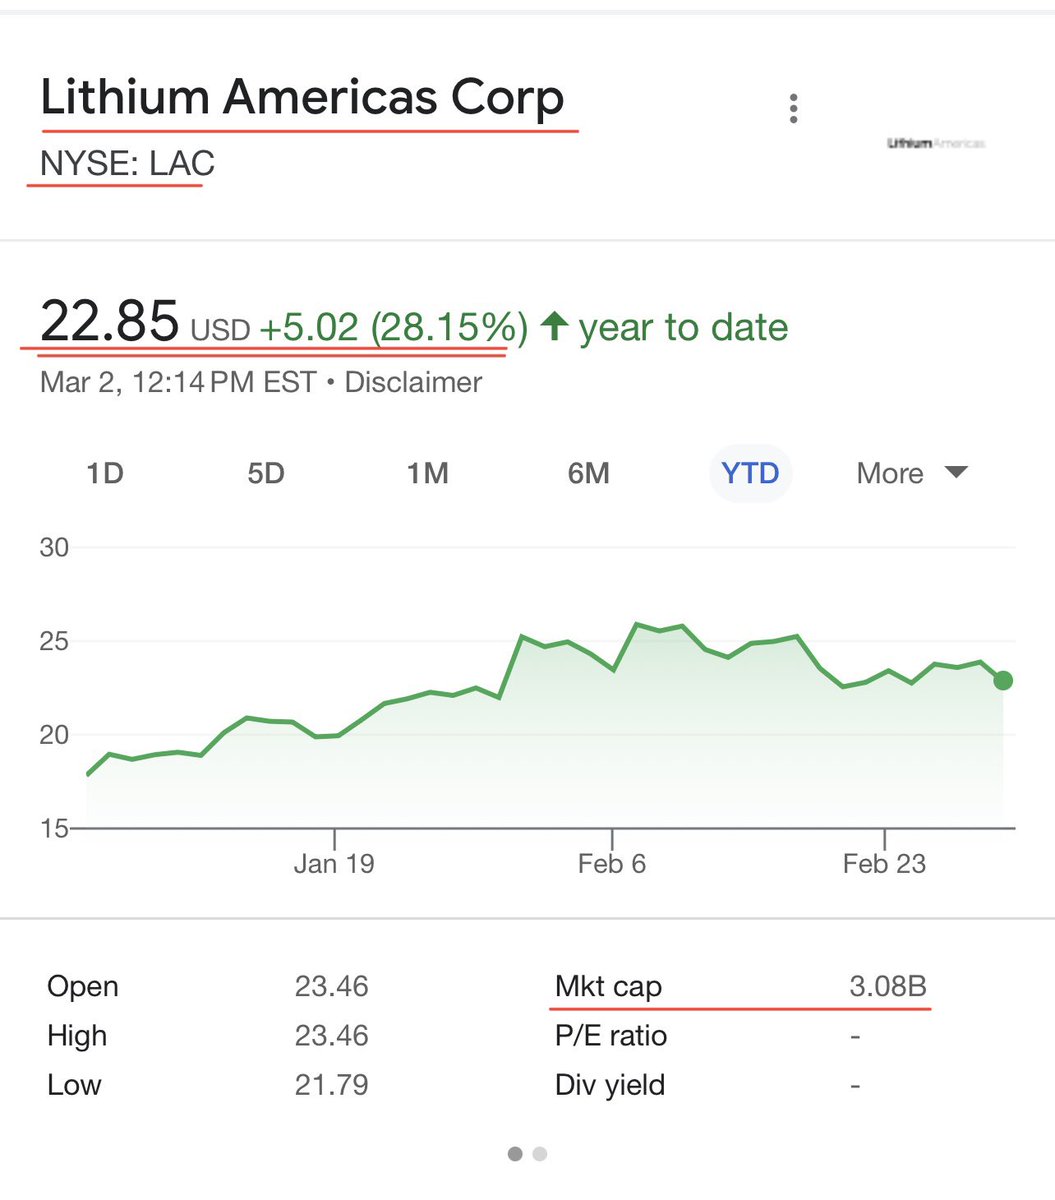 $BRGC Our new geologist, James Ingraffia, is a #lithium rockstar.

James characterized the Thacker Pass lithium claystone deposit, largest known lithium resource in the US, w/ $LAC and published the results.

Lithium Americas is trading on #NYSE with a $3B MC.